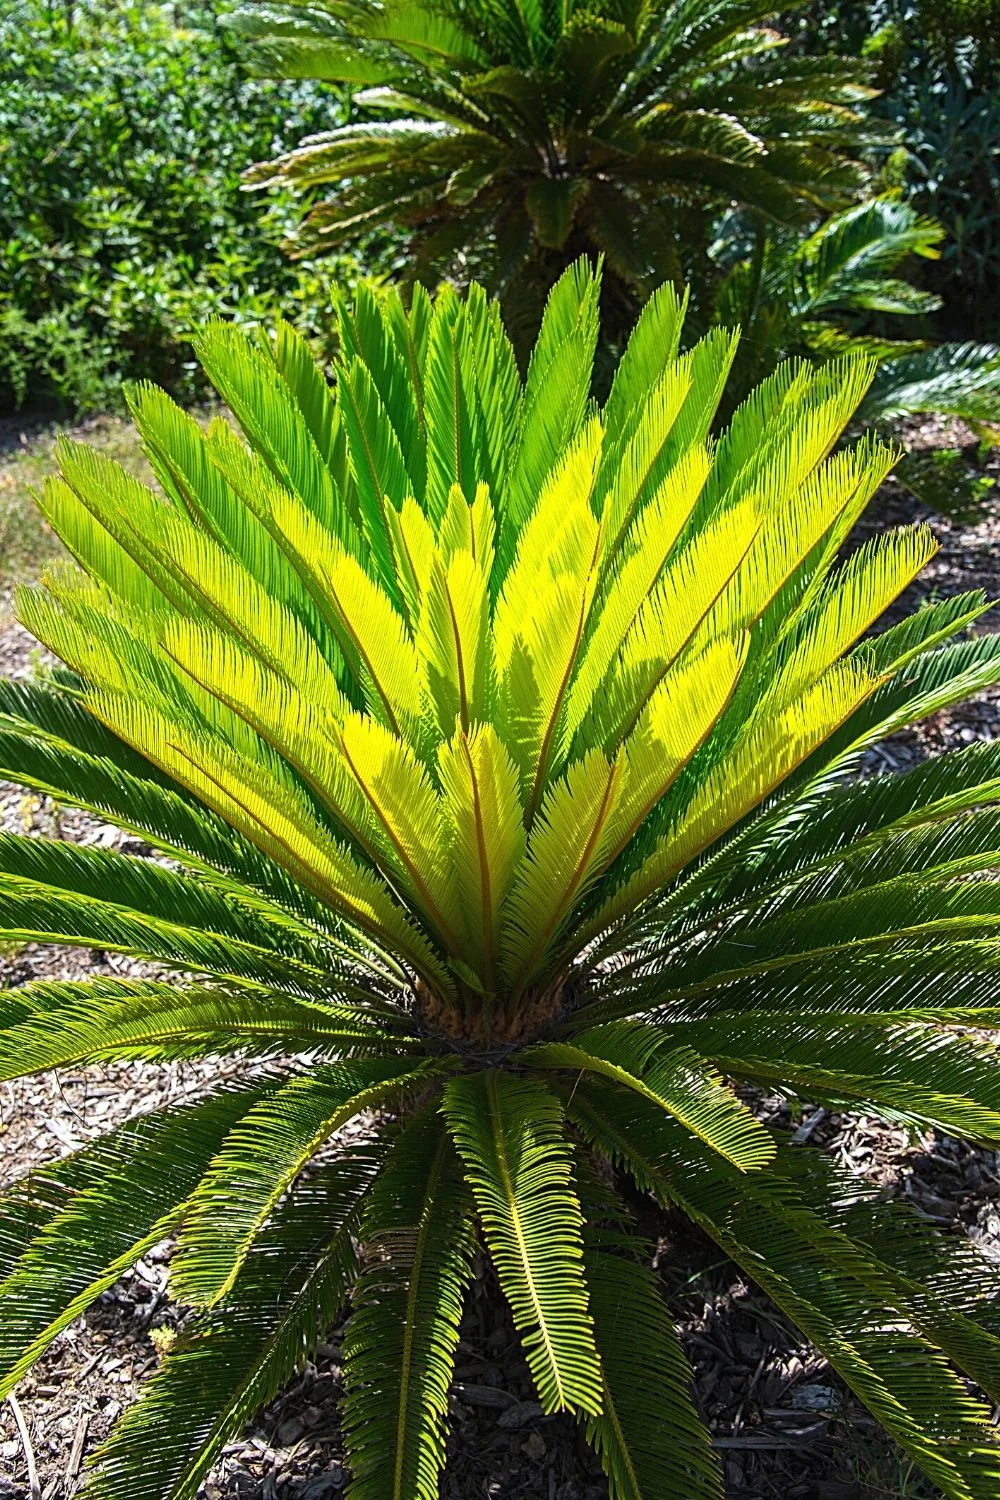 Sago palms, with their feathery foliage, are great addition to your growing west-balcony plant collection